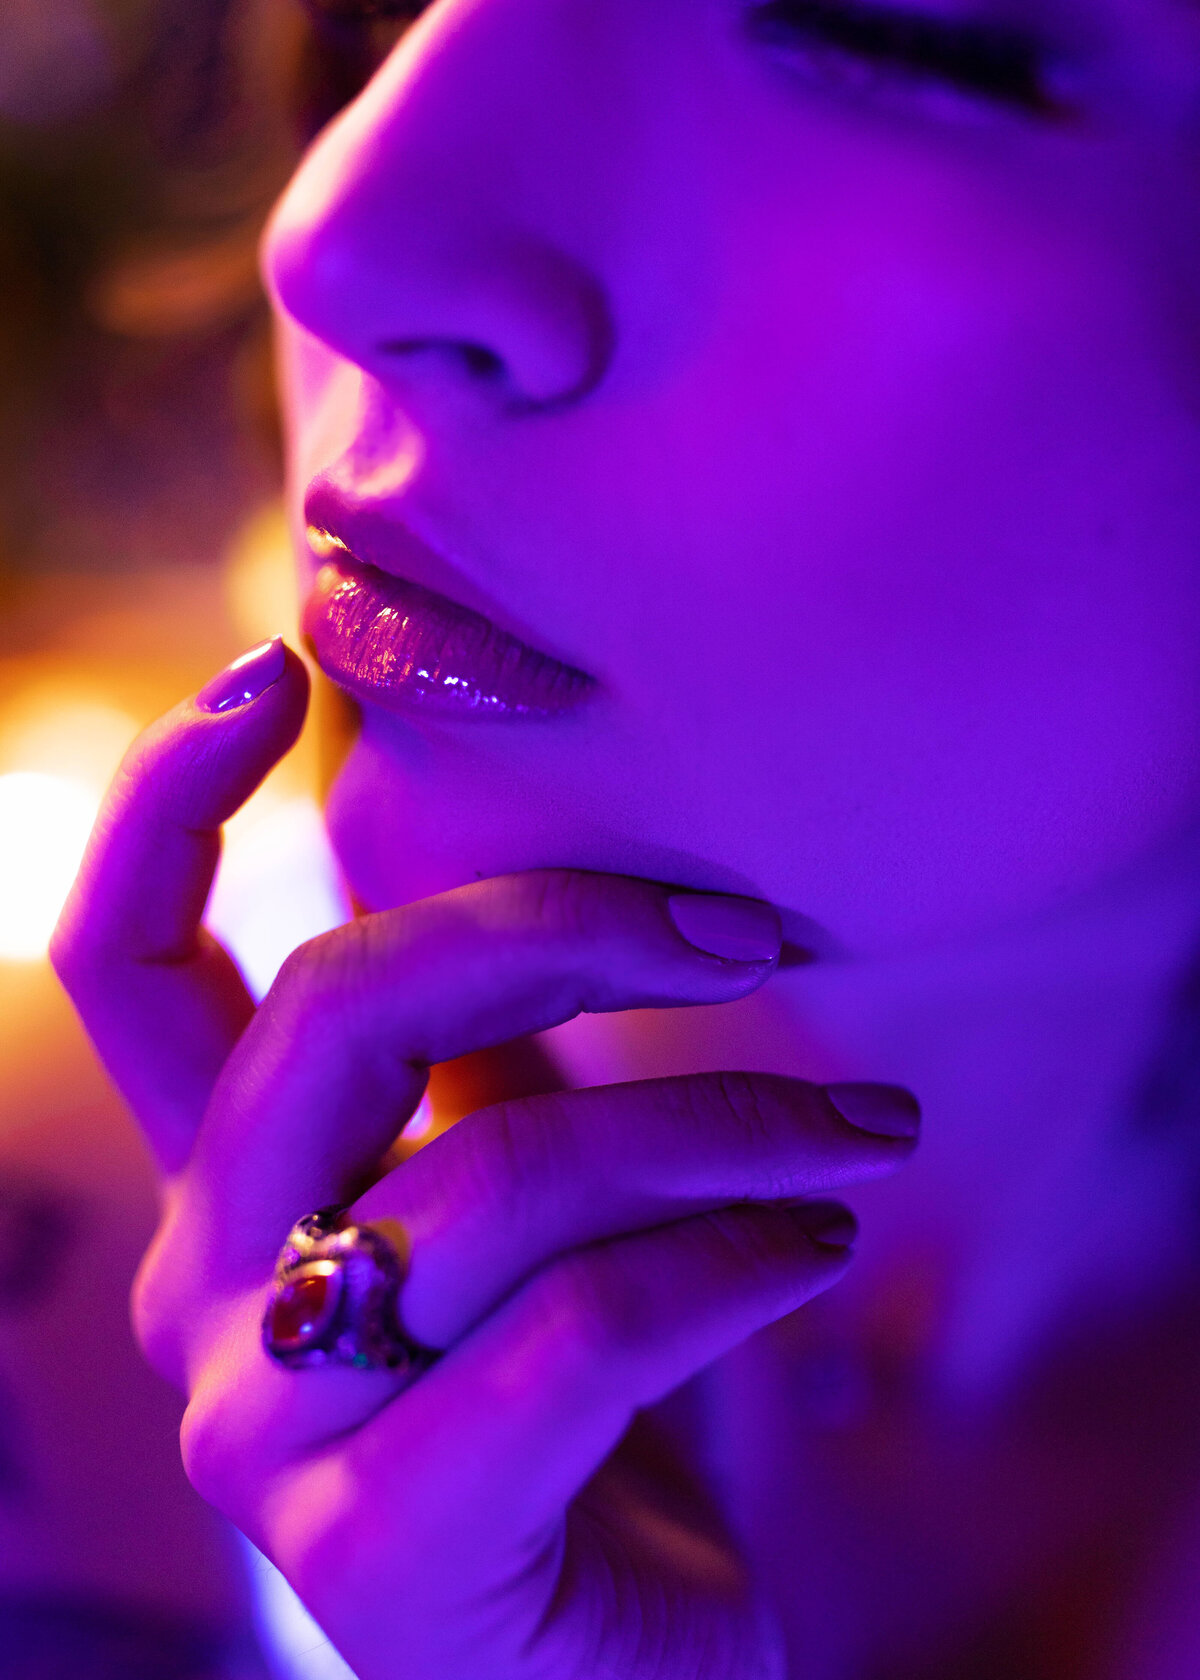 close up boudoir portrait of woman in blacklight lighting with hands on face